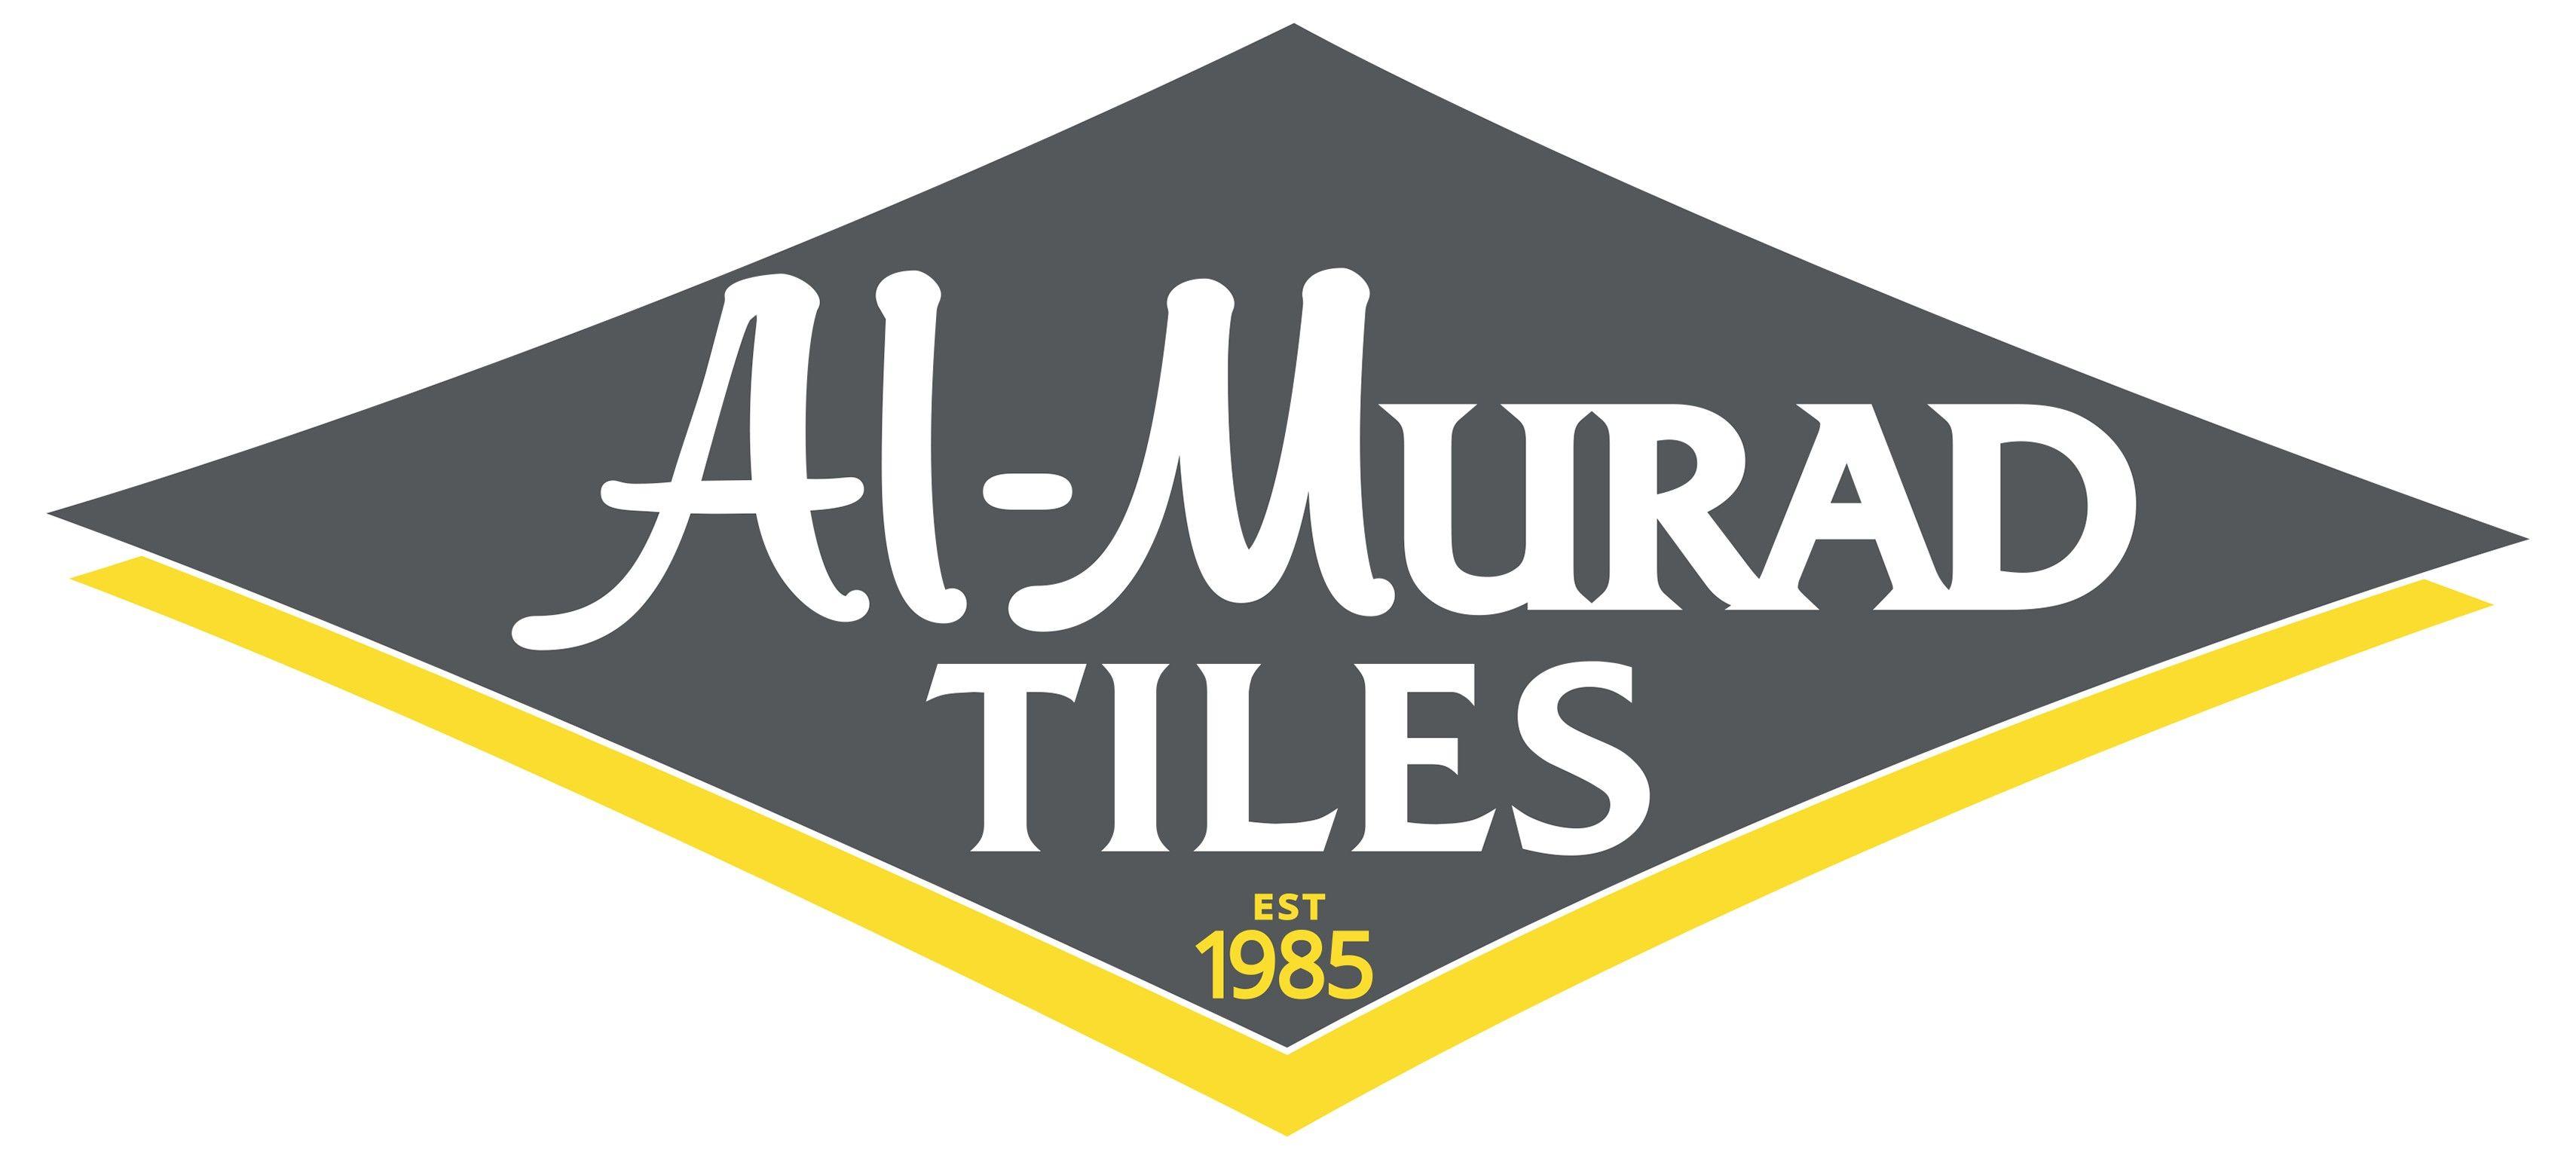 Murad Logo - Al Murad's largest independent tile and natural stone